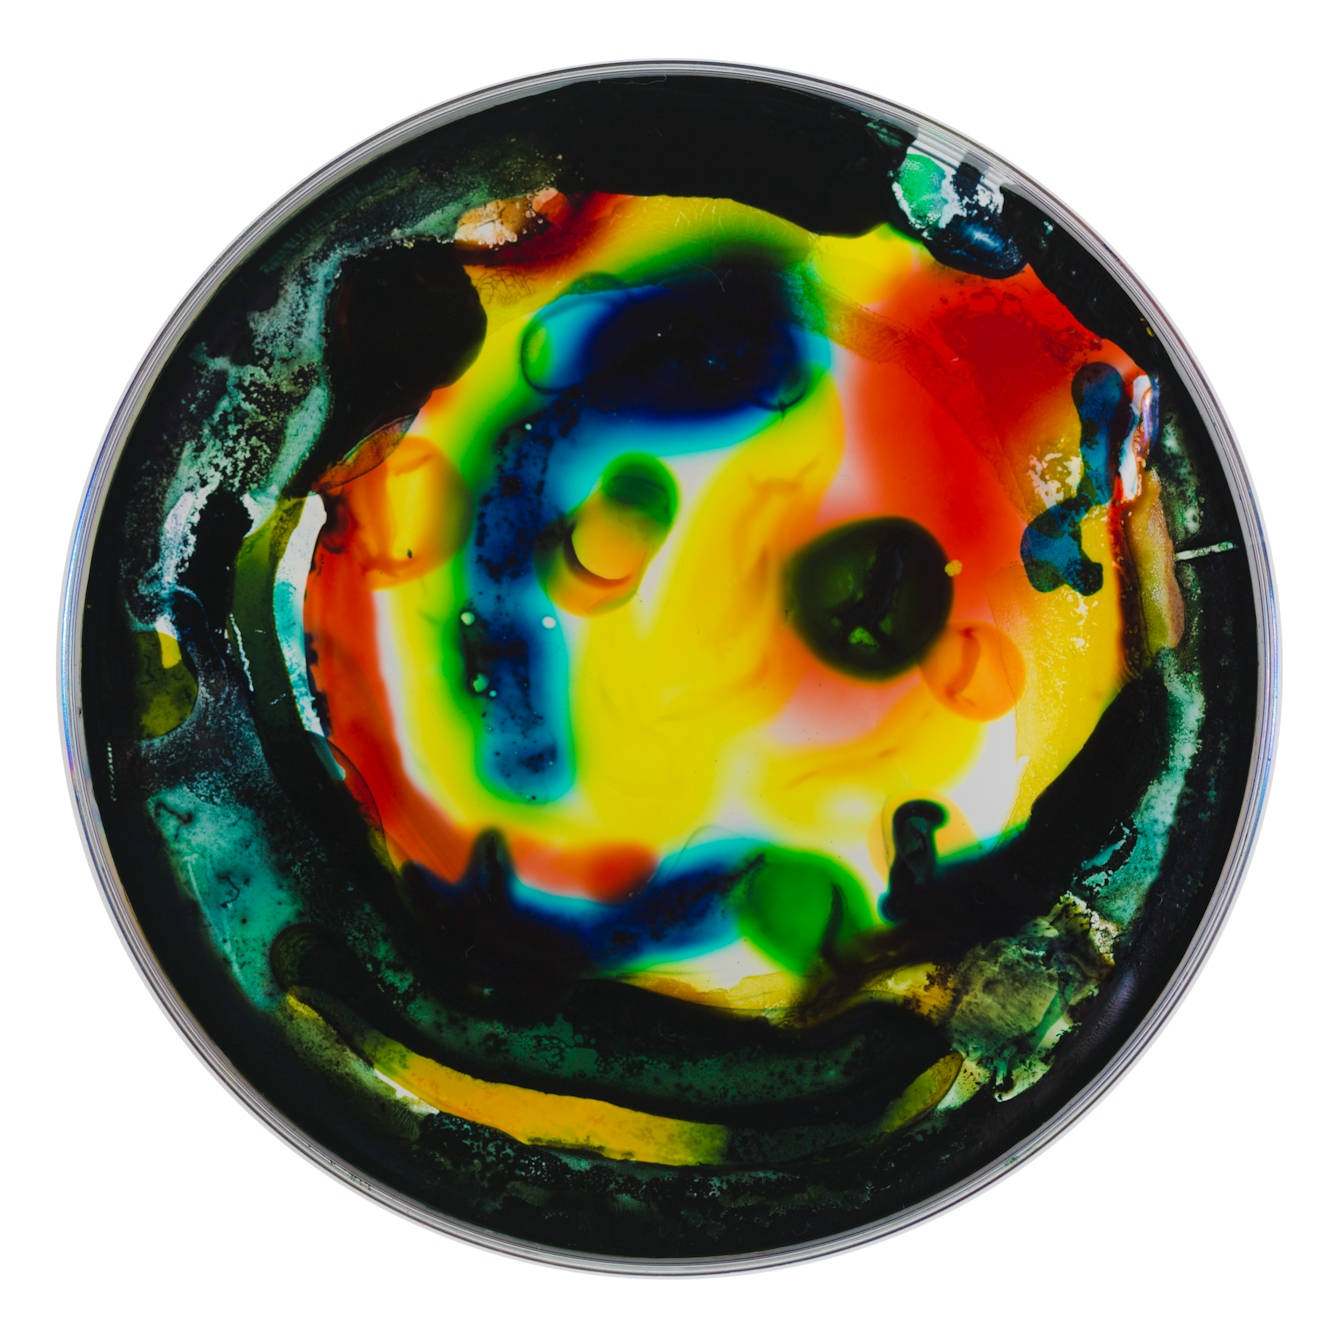 Photograph of a petri dish containing colourful swirls red, blue, green and black, made from ink, watercolour, pva and resin.